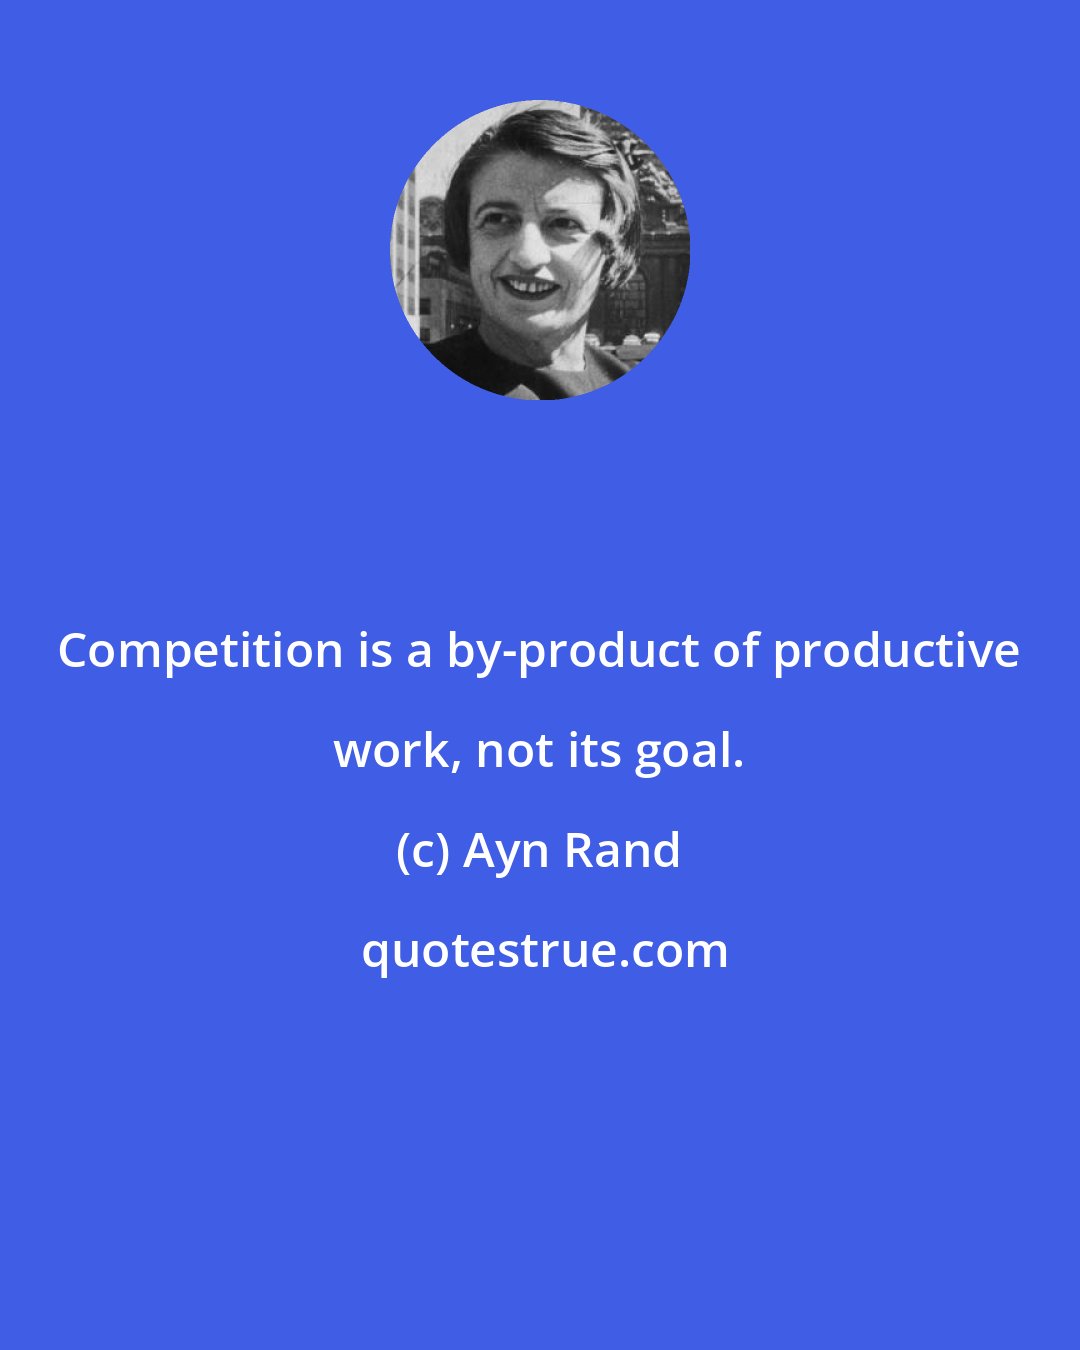 Ayn Rand: Competition is a by-product of productive work, not its goal.